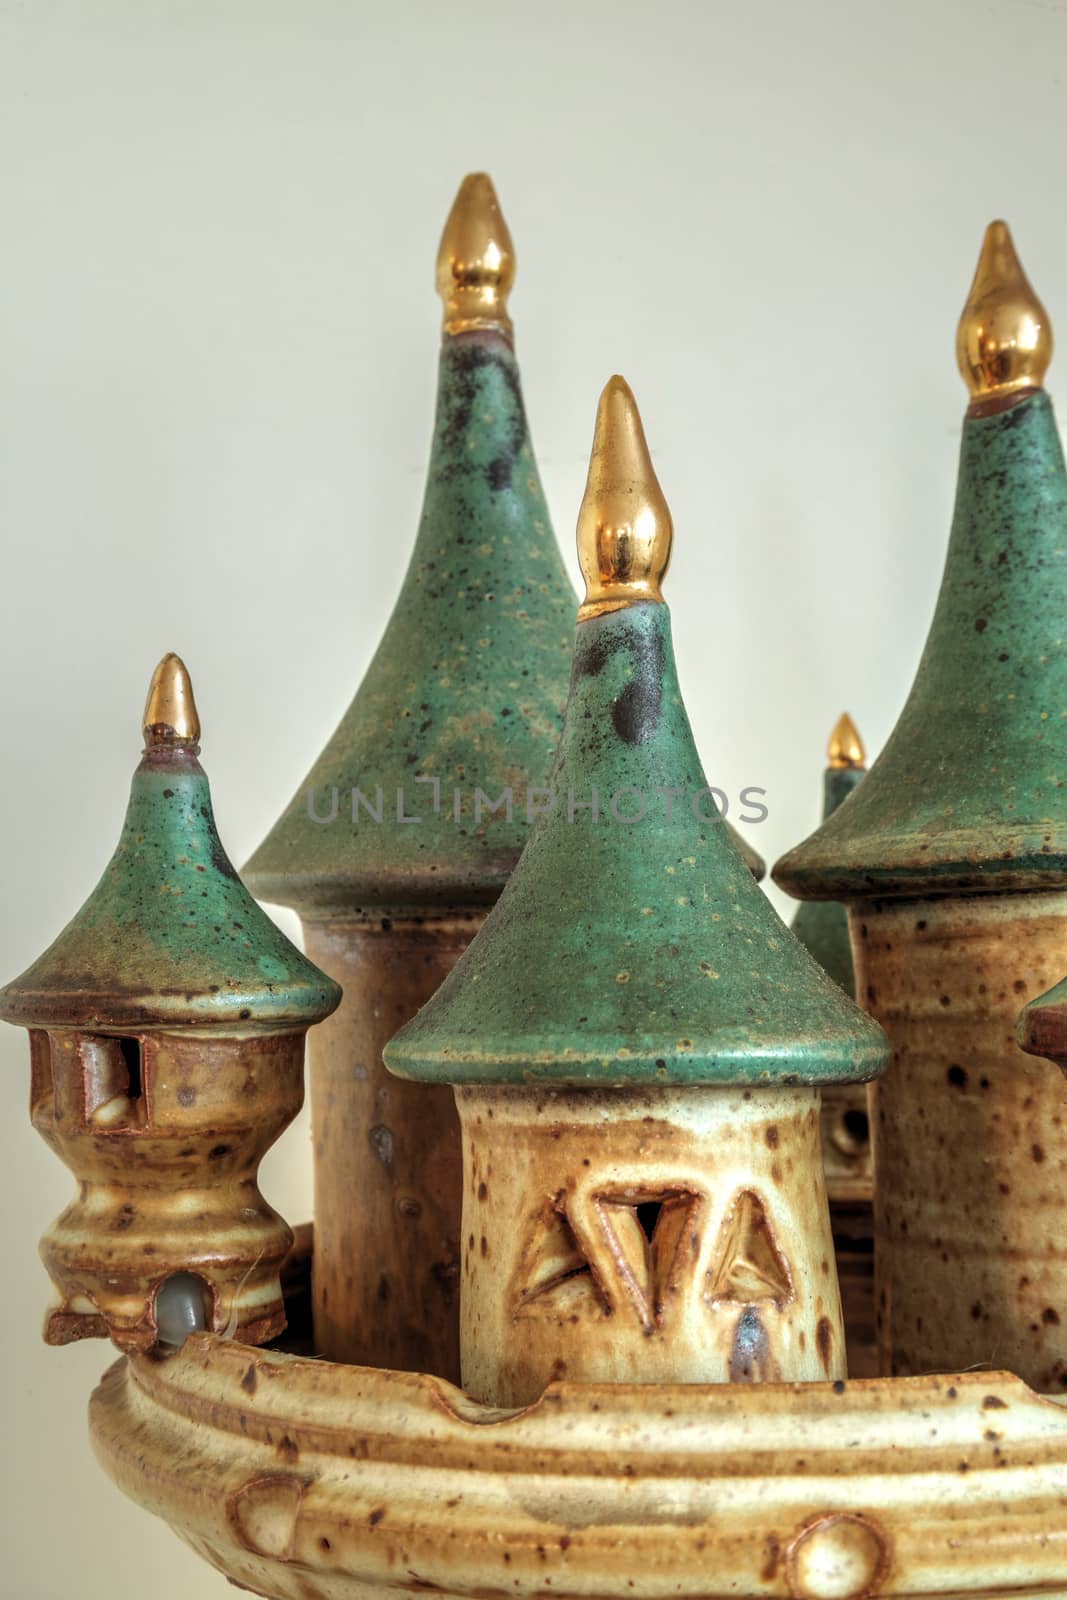 Pottery castle with turrets tipped in gold  by steffstarr